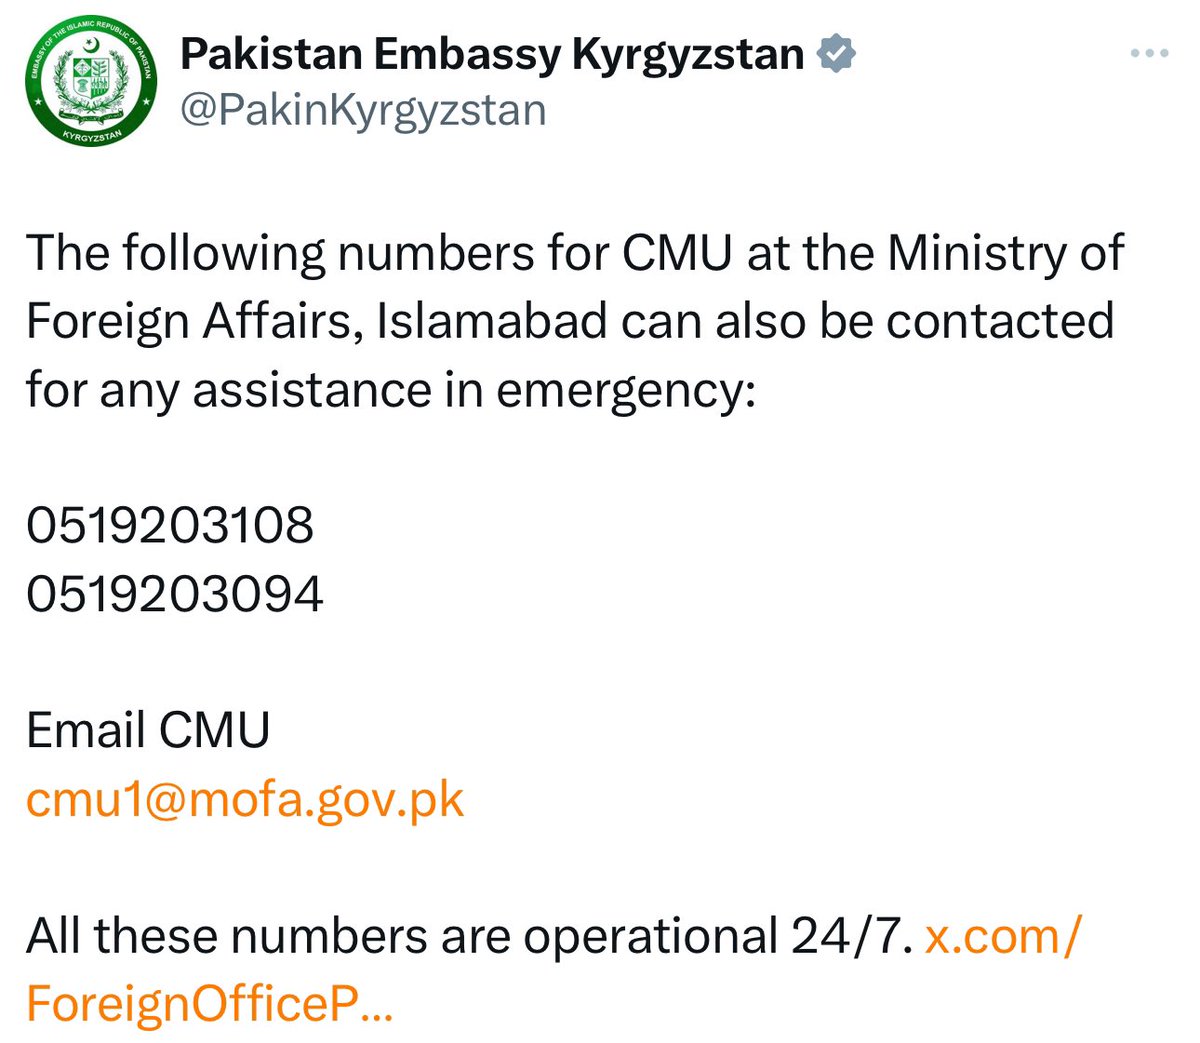 For families desiring information from @ForeignOfficePk please note: @MIshaqDar50 @Mumtazzb